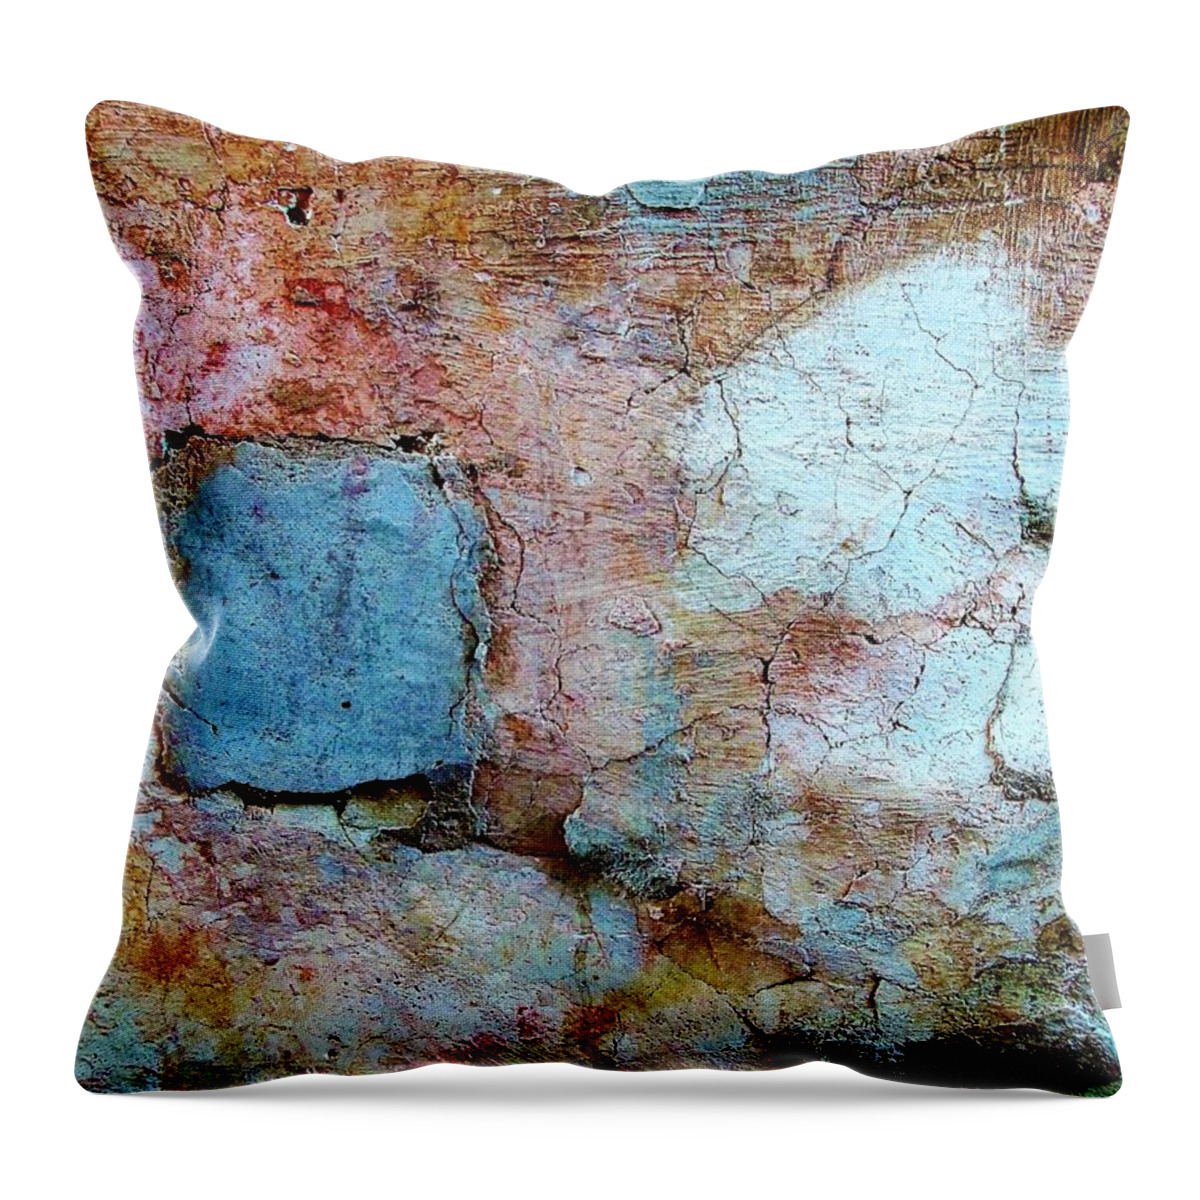 Texture Throw Pillow featuring the photograph Wall Abstract 138 by Maria Huntley